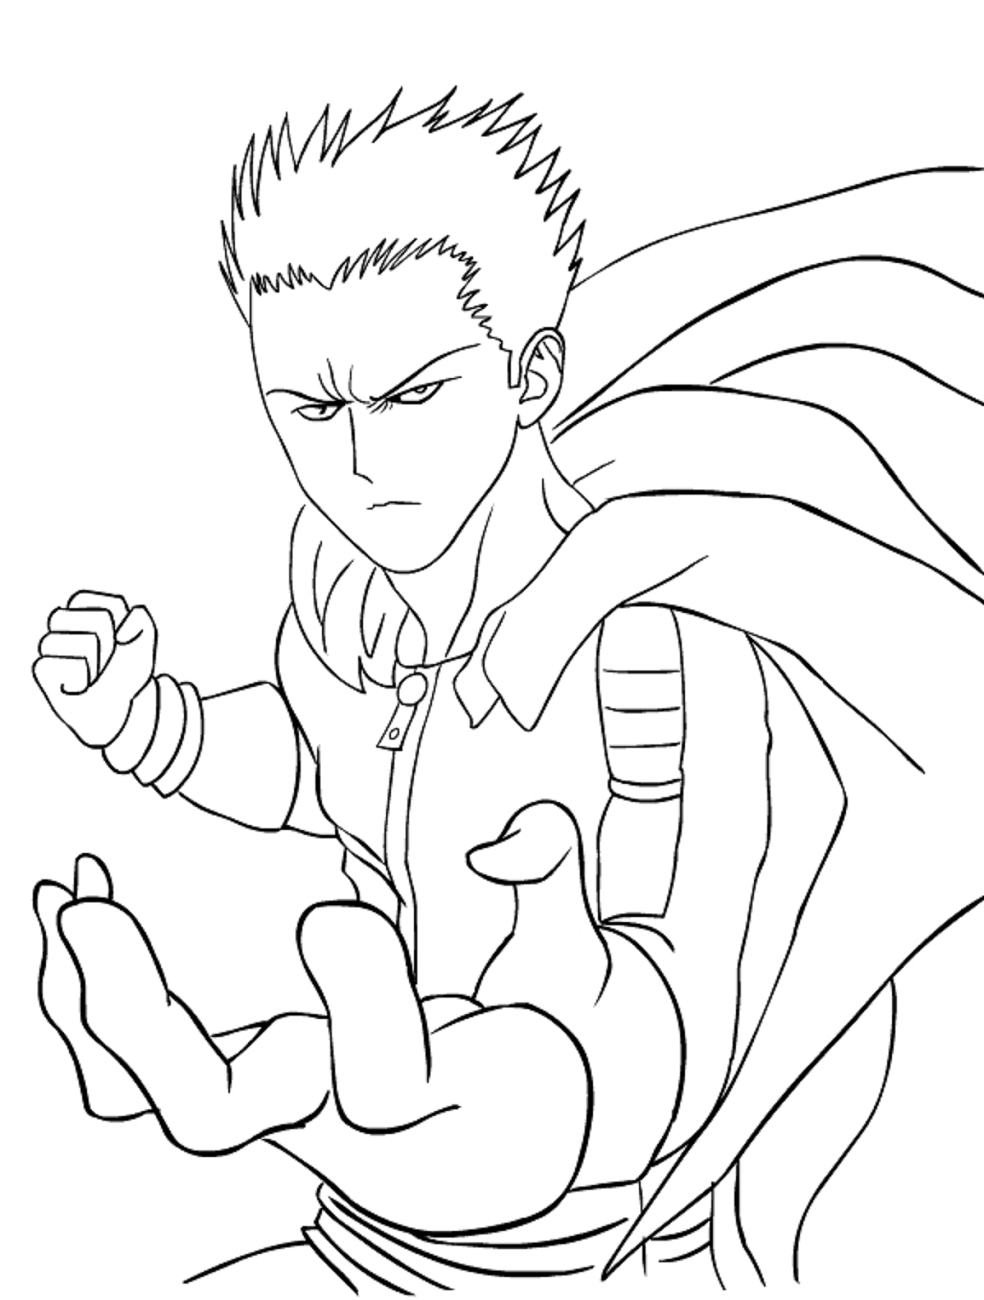 Blast In One Punch Man Coloring Page - Free Printable Coloring Pages